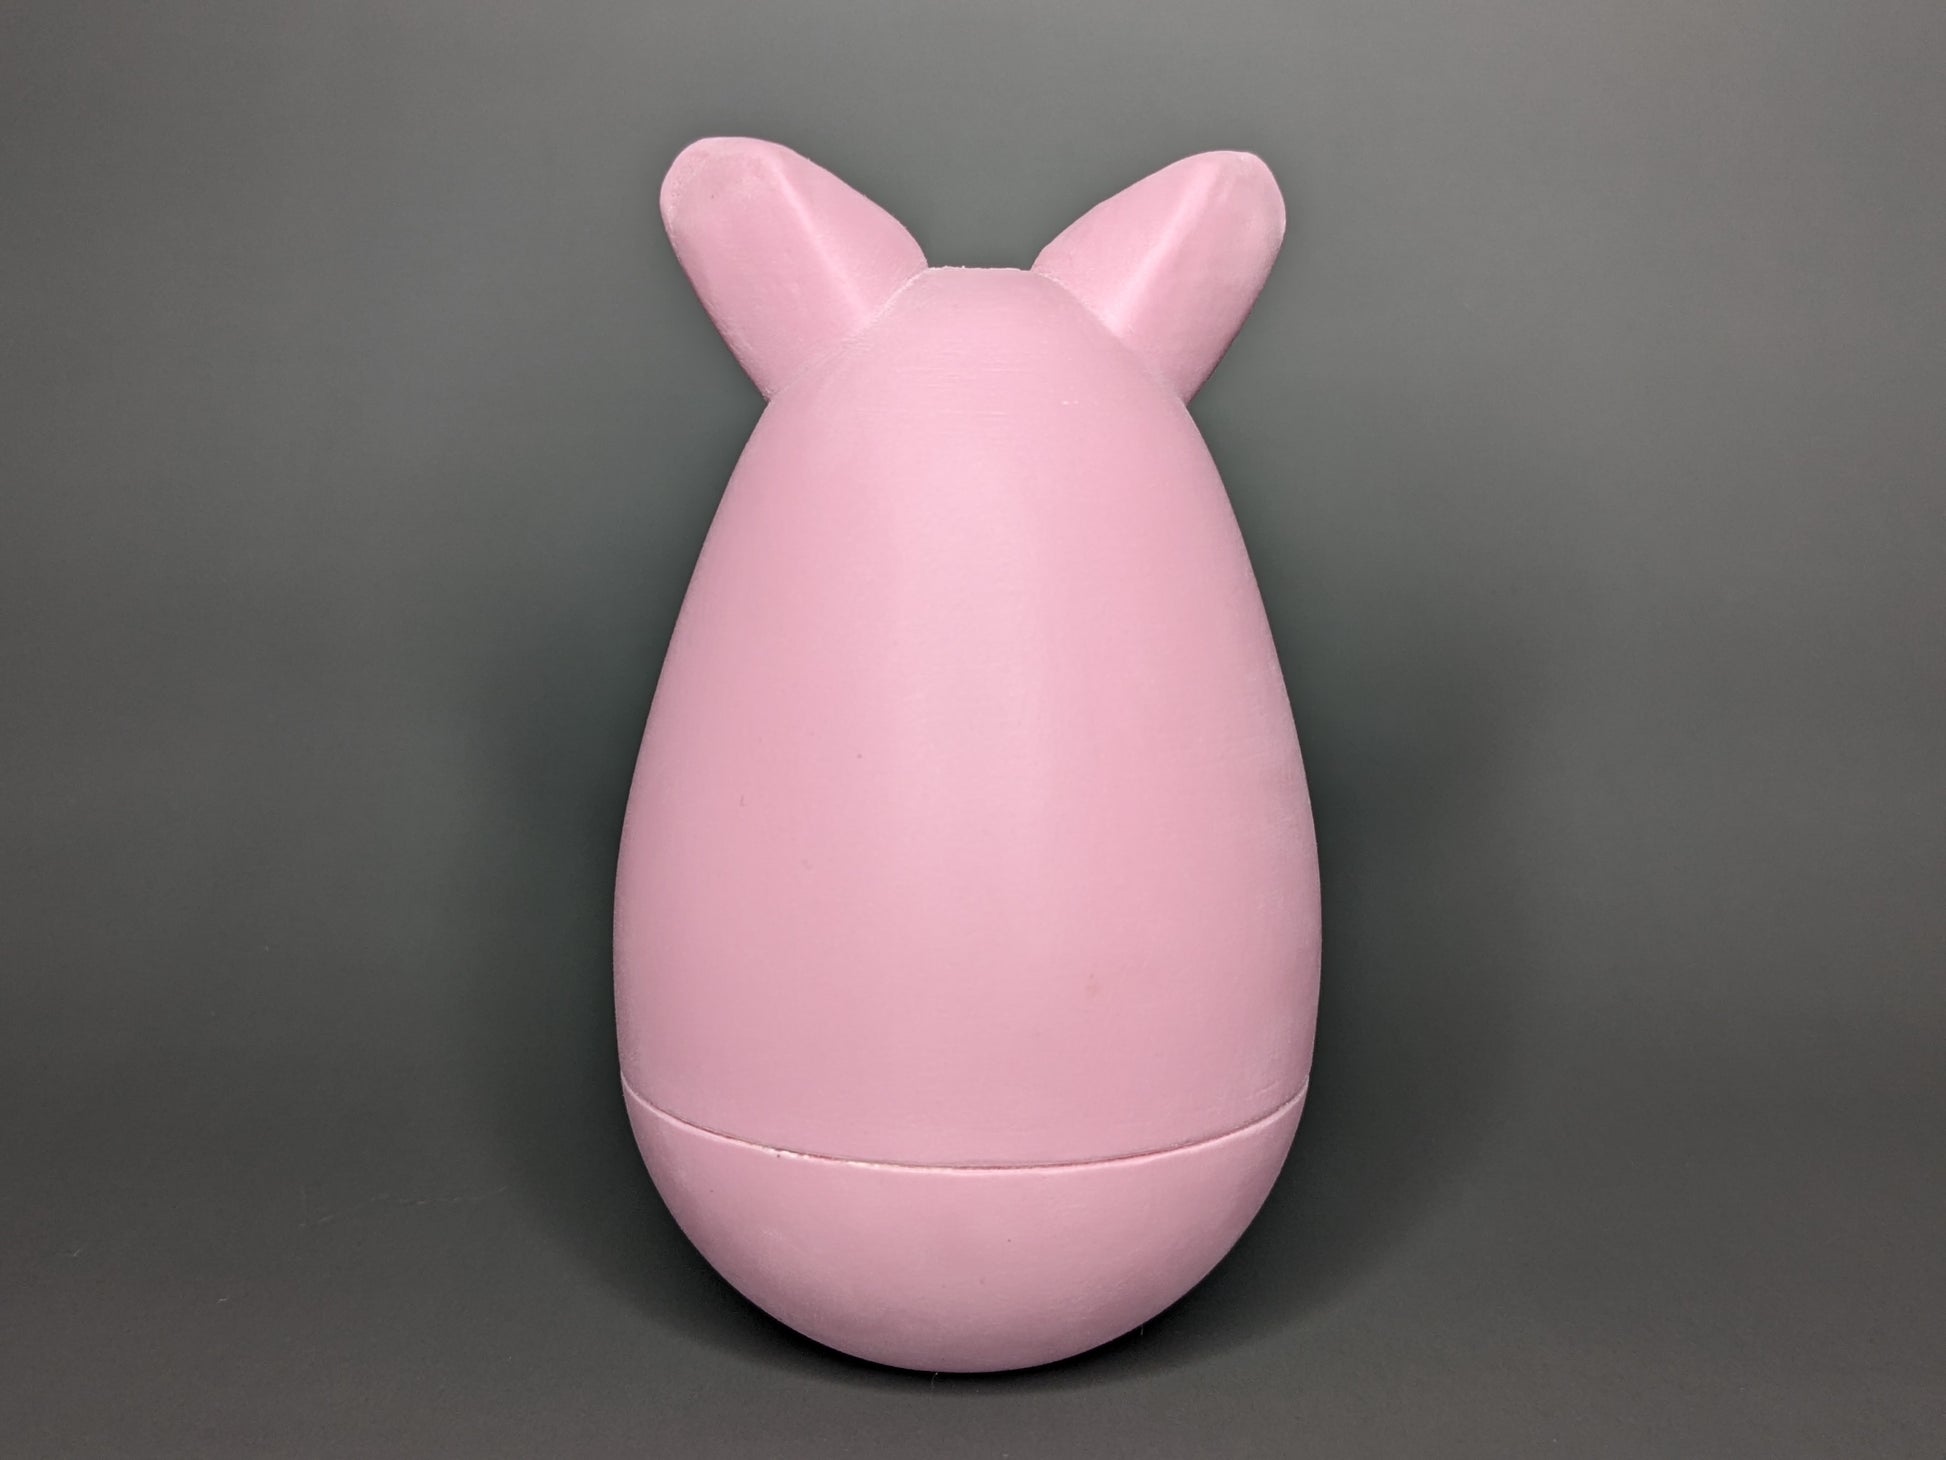 The back-side of the Kalua the Peeg tama. It is a pink egg-shaped 3d-printed tama with ears sticking out of the top of the egg shape. A seam sits just below the widest point of the tama.